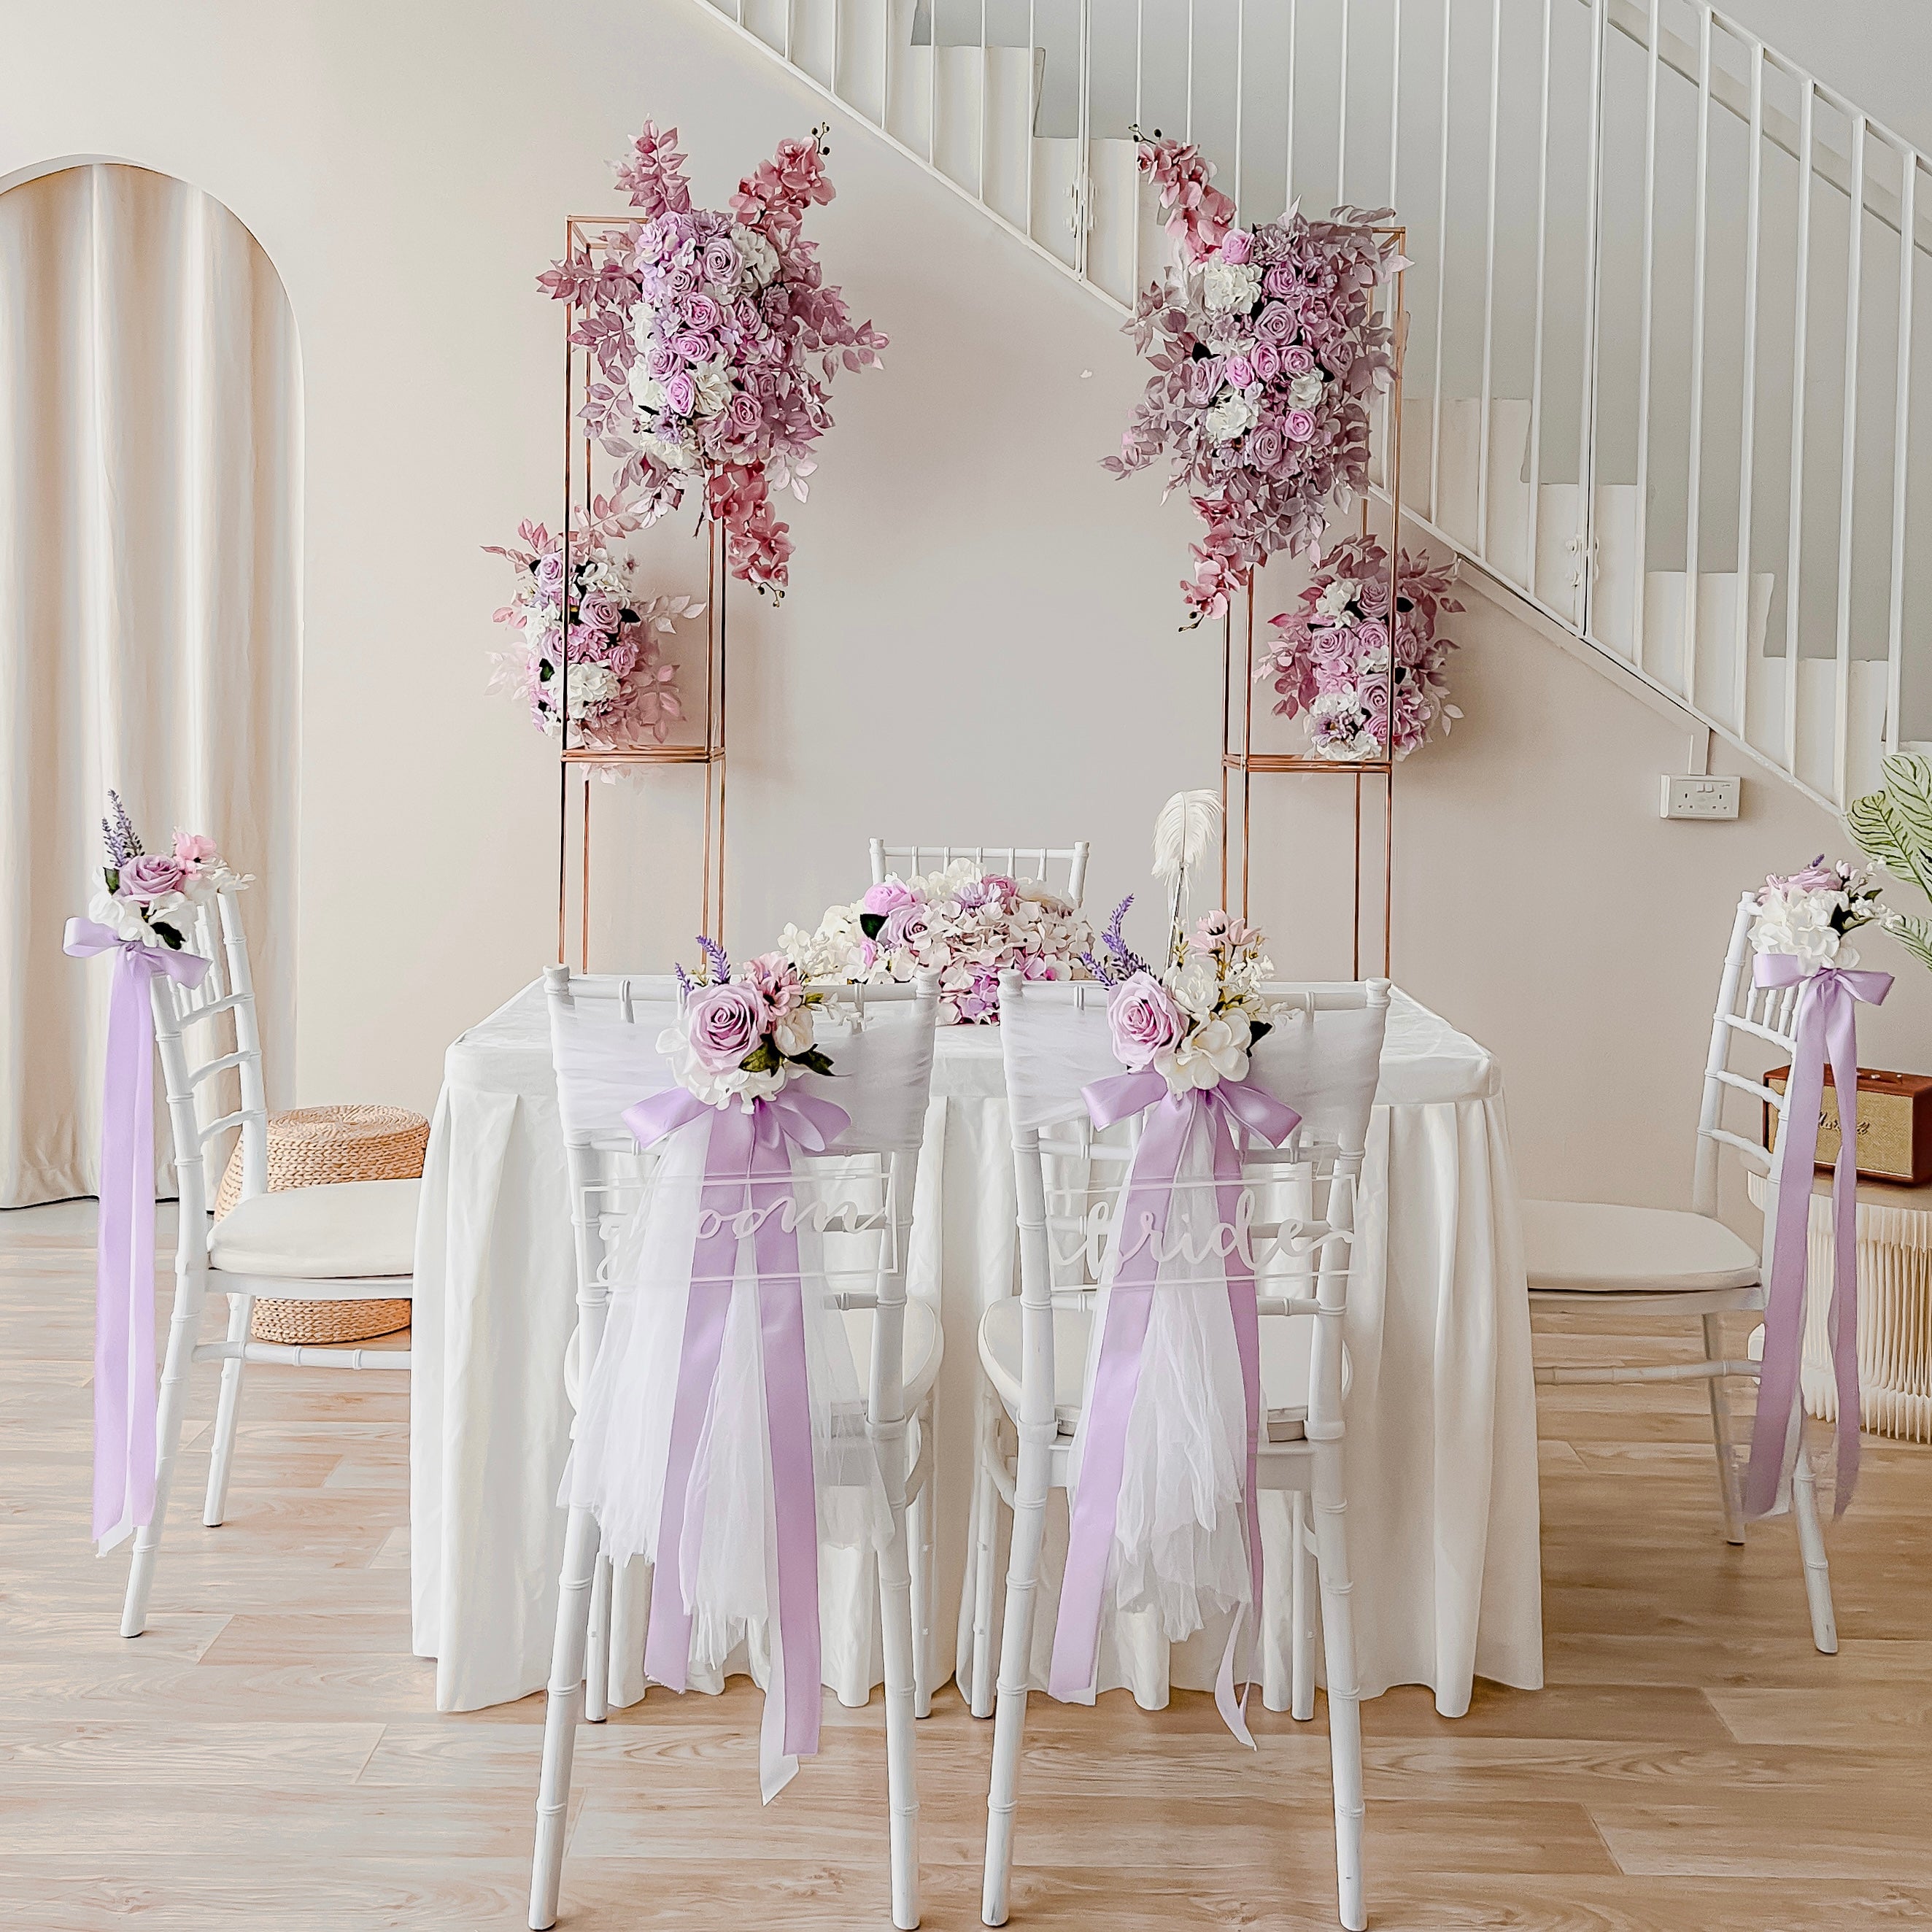 Sweet and Simple Home/ Function Room Solemnisation/ROM Decor in Singapore - Purple/Lilac & White Theme with Column Floral Arch (Venue: POP Studio)